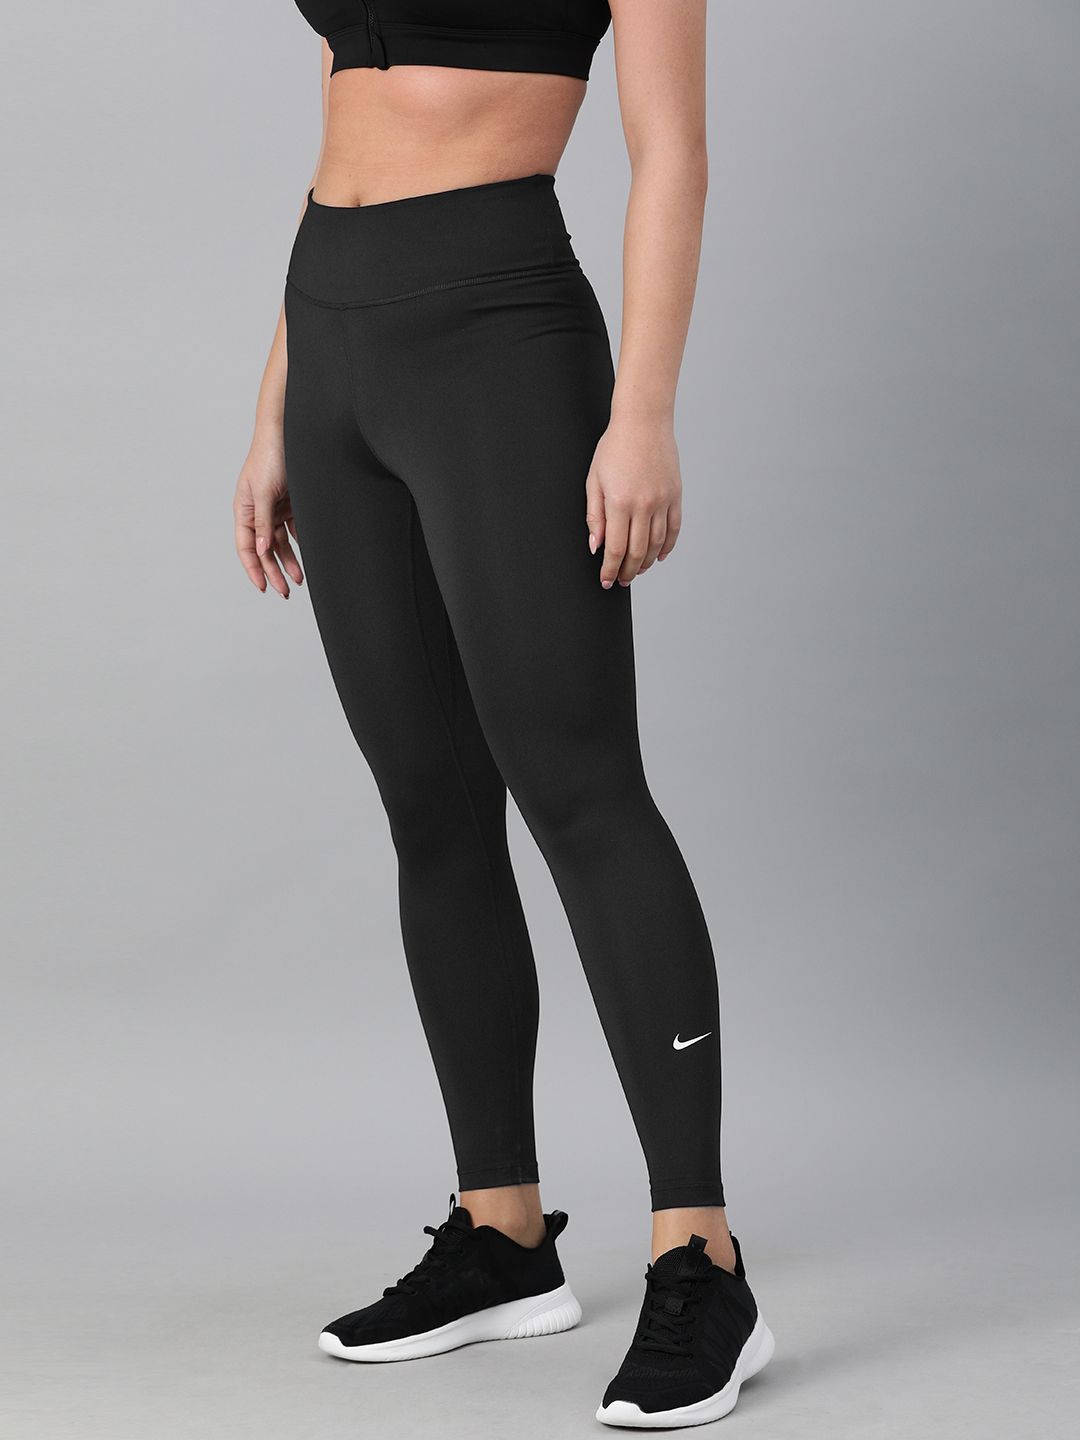 Nike Women Black Solid One Dri-Fit Tights Price in India